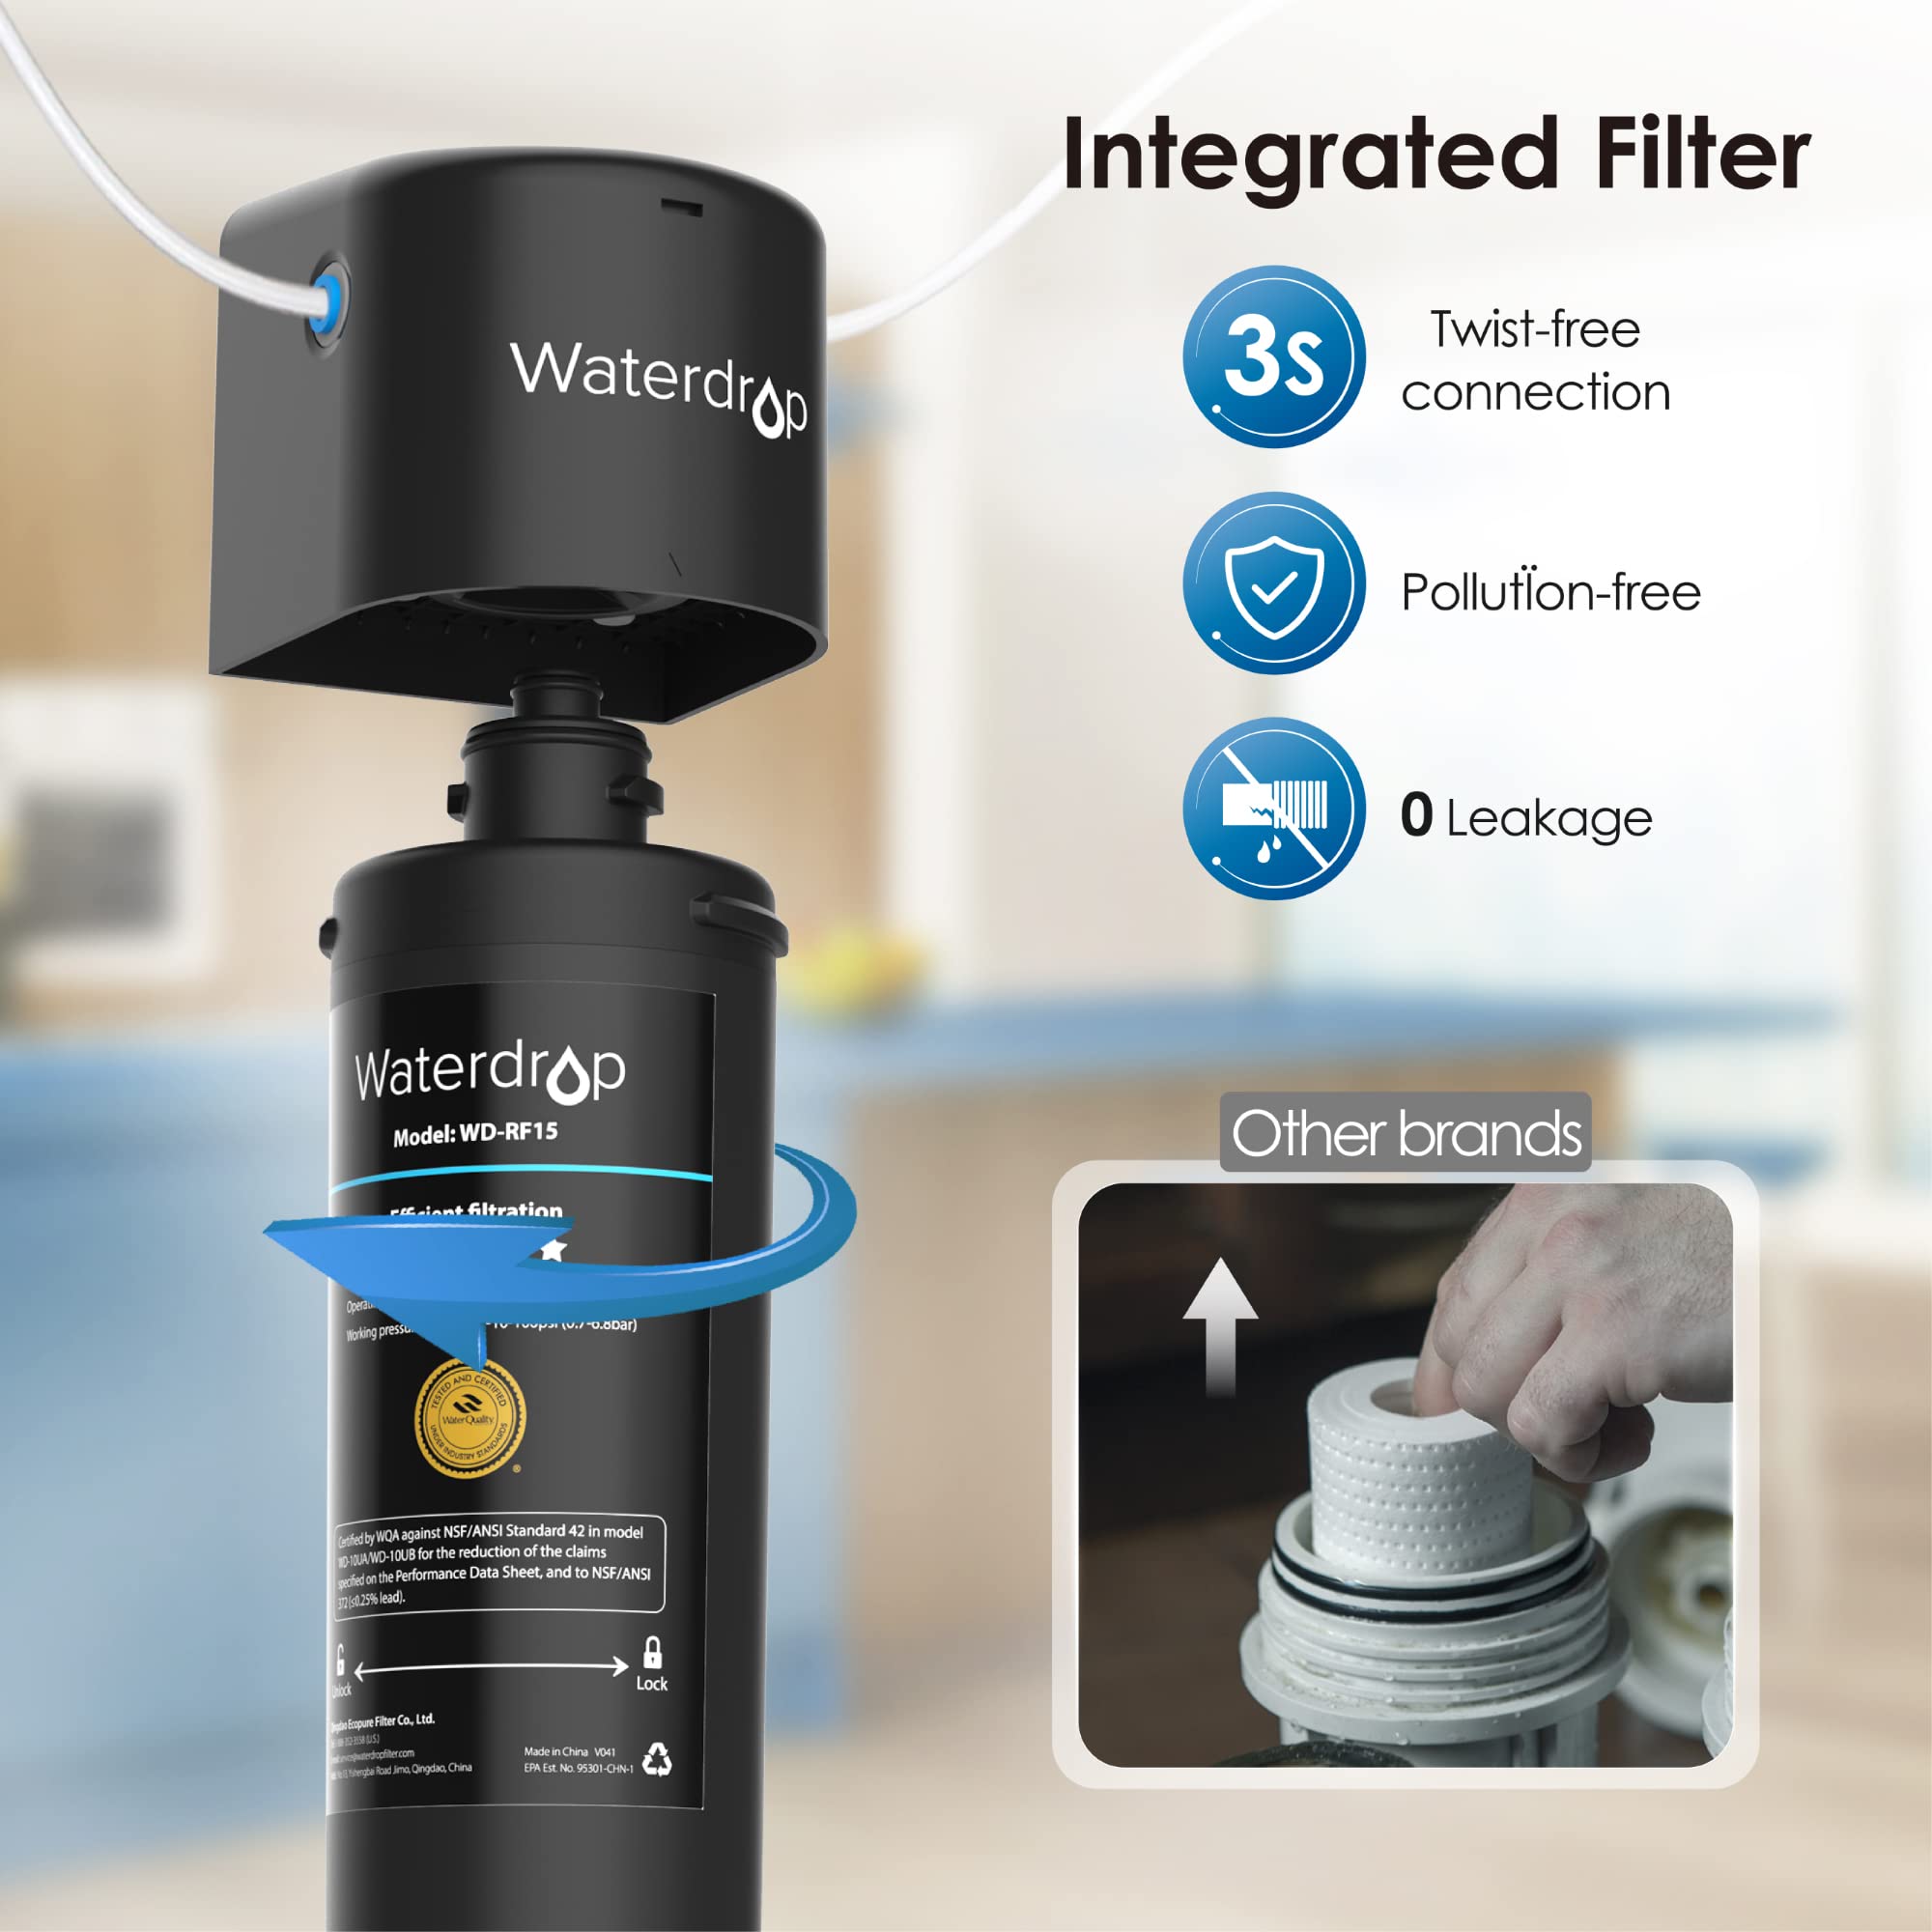 Waterdrop 15UB Under Sink Water Filter, Under Sink Water Filtration System for 2 Years, NSF/ANSI 42 Certified, Reduces PFAS, PFOA/PFOS, Lead, Under Sink Water Filter with Faucet, 16K Gallons